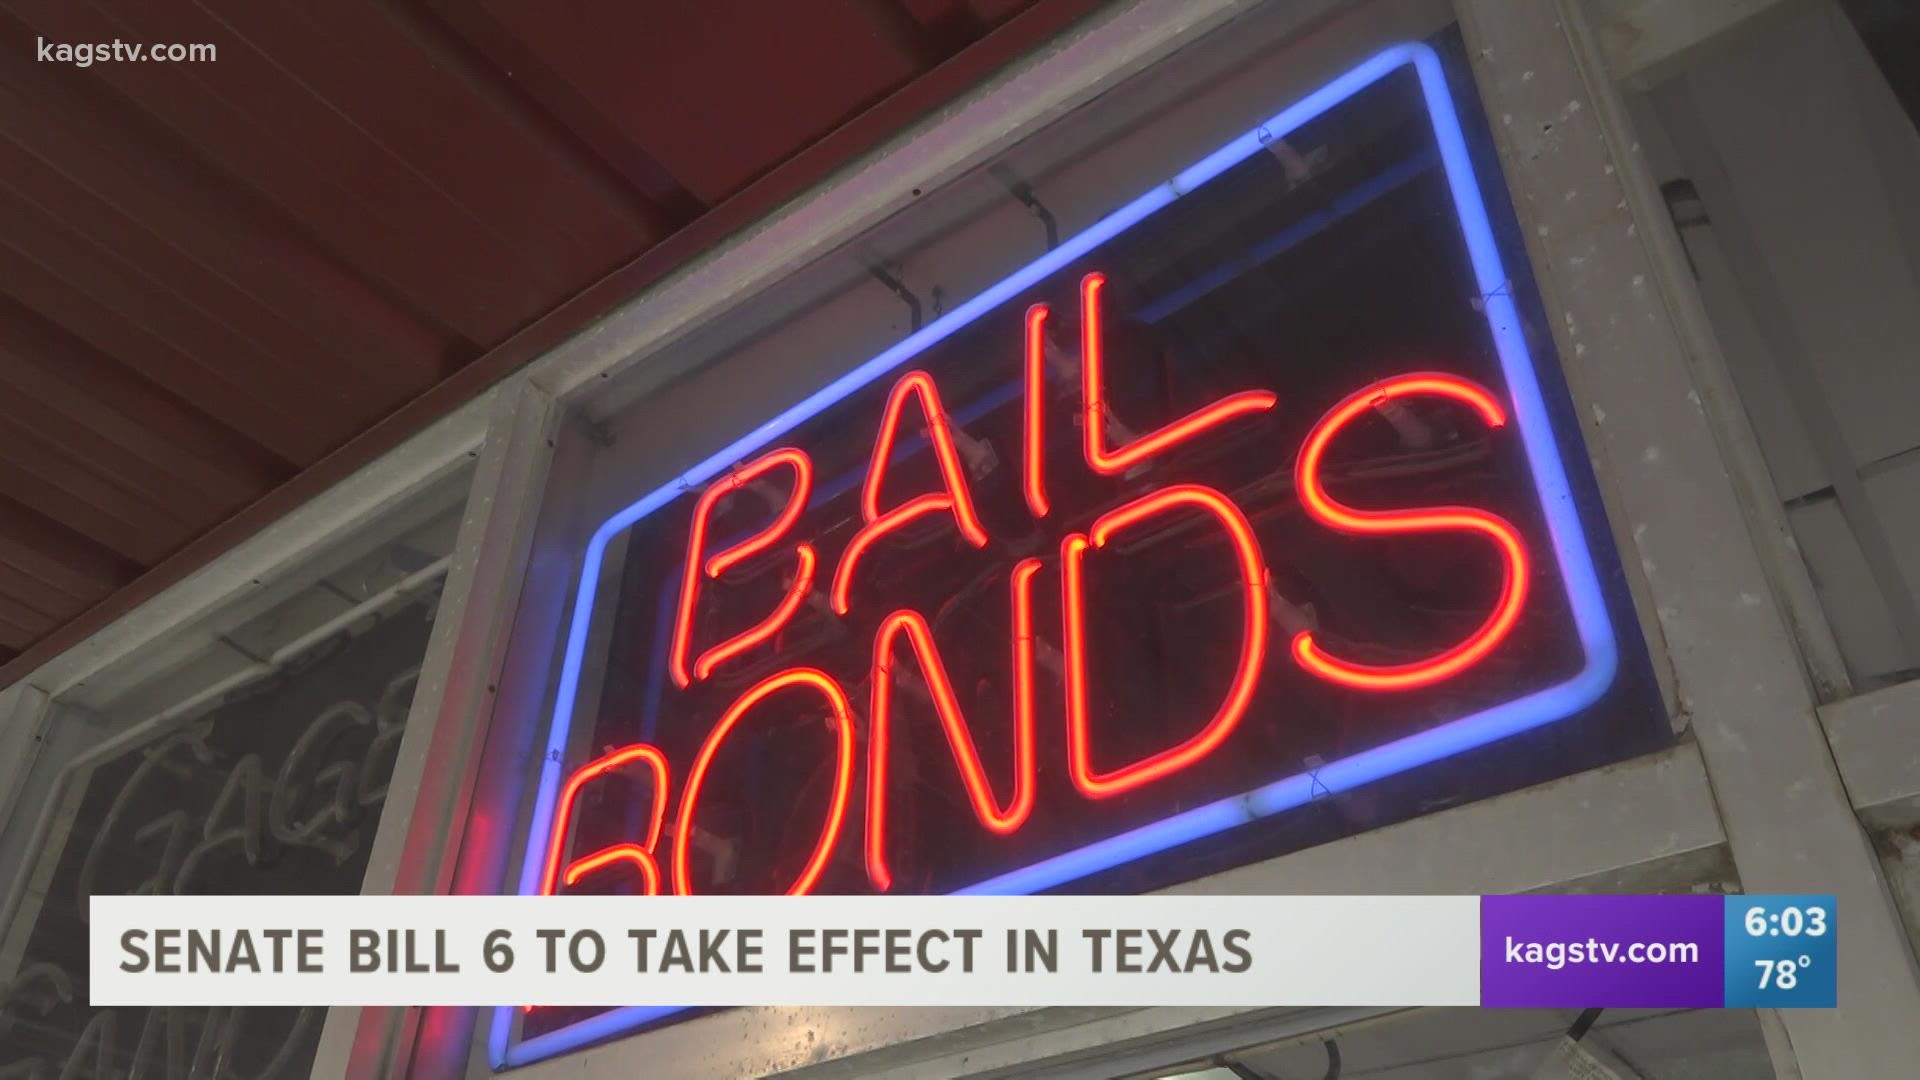 The bill will require defendants accused of violent crimes to pay cash for their bail.